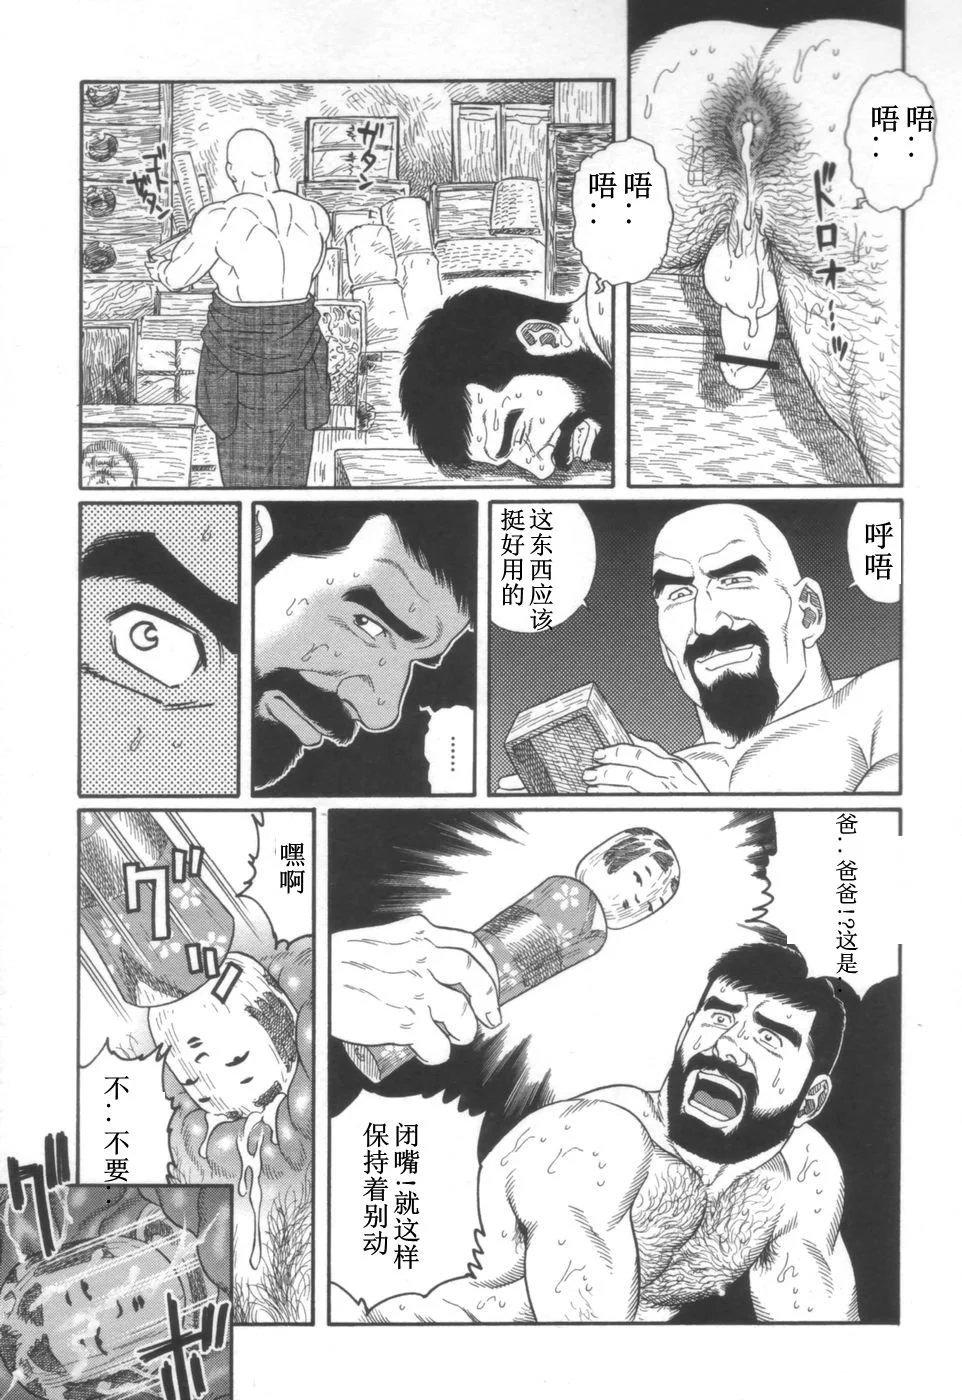 Perra Gedou no Ie Joukan | 邪道之家 Vol. 1 Ch.3 18yearsold - Page 11